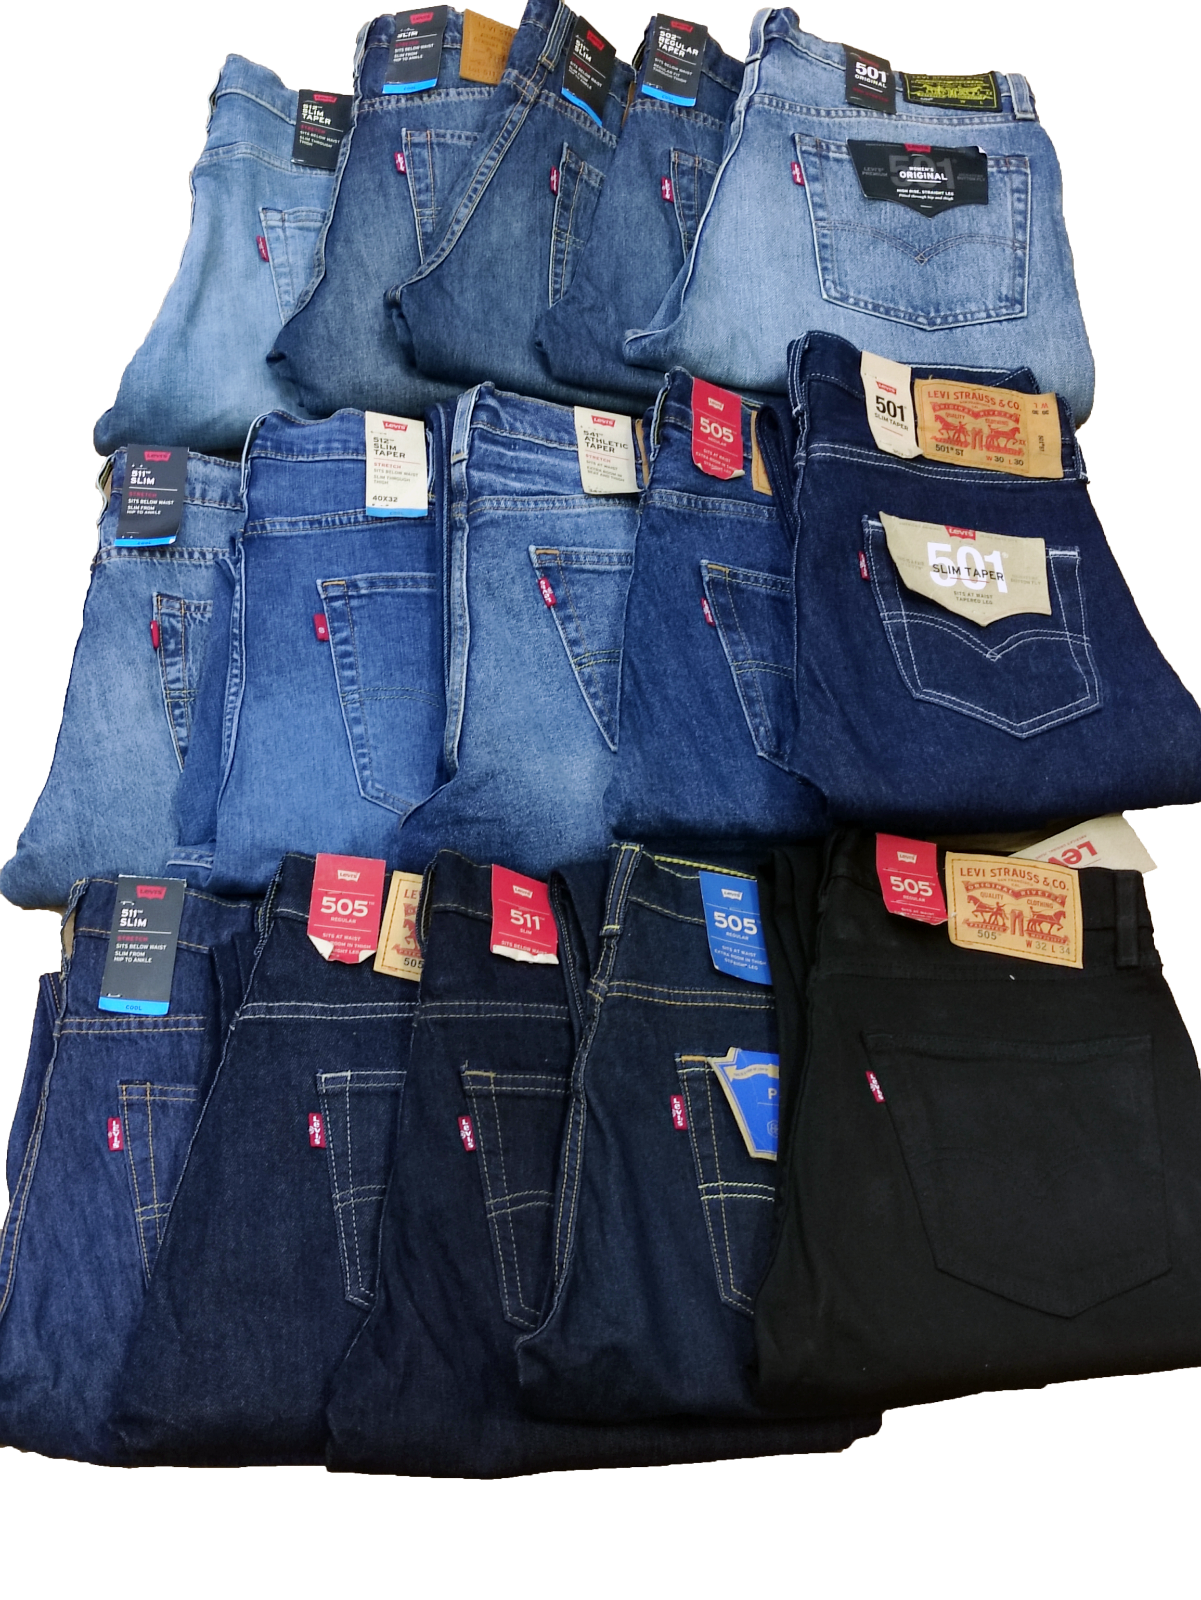 LEVI’s 501 70% OFF Outlet Outlet ☆ Free Shipping 502 505 511 512 Jeans W2 Vintage 541 Menapos;s